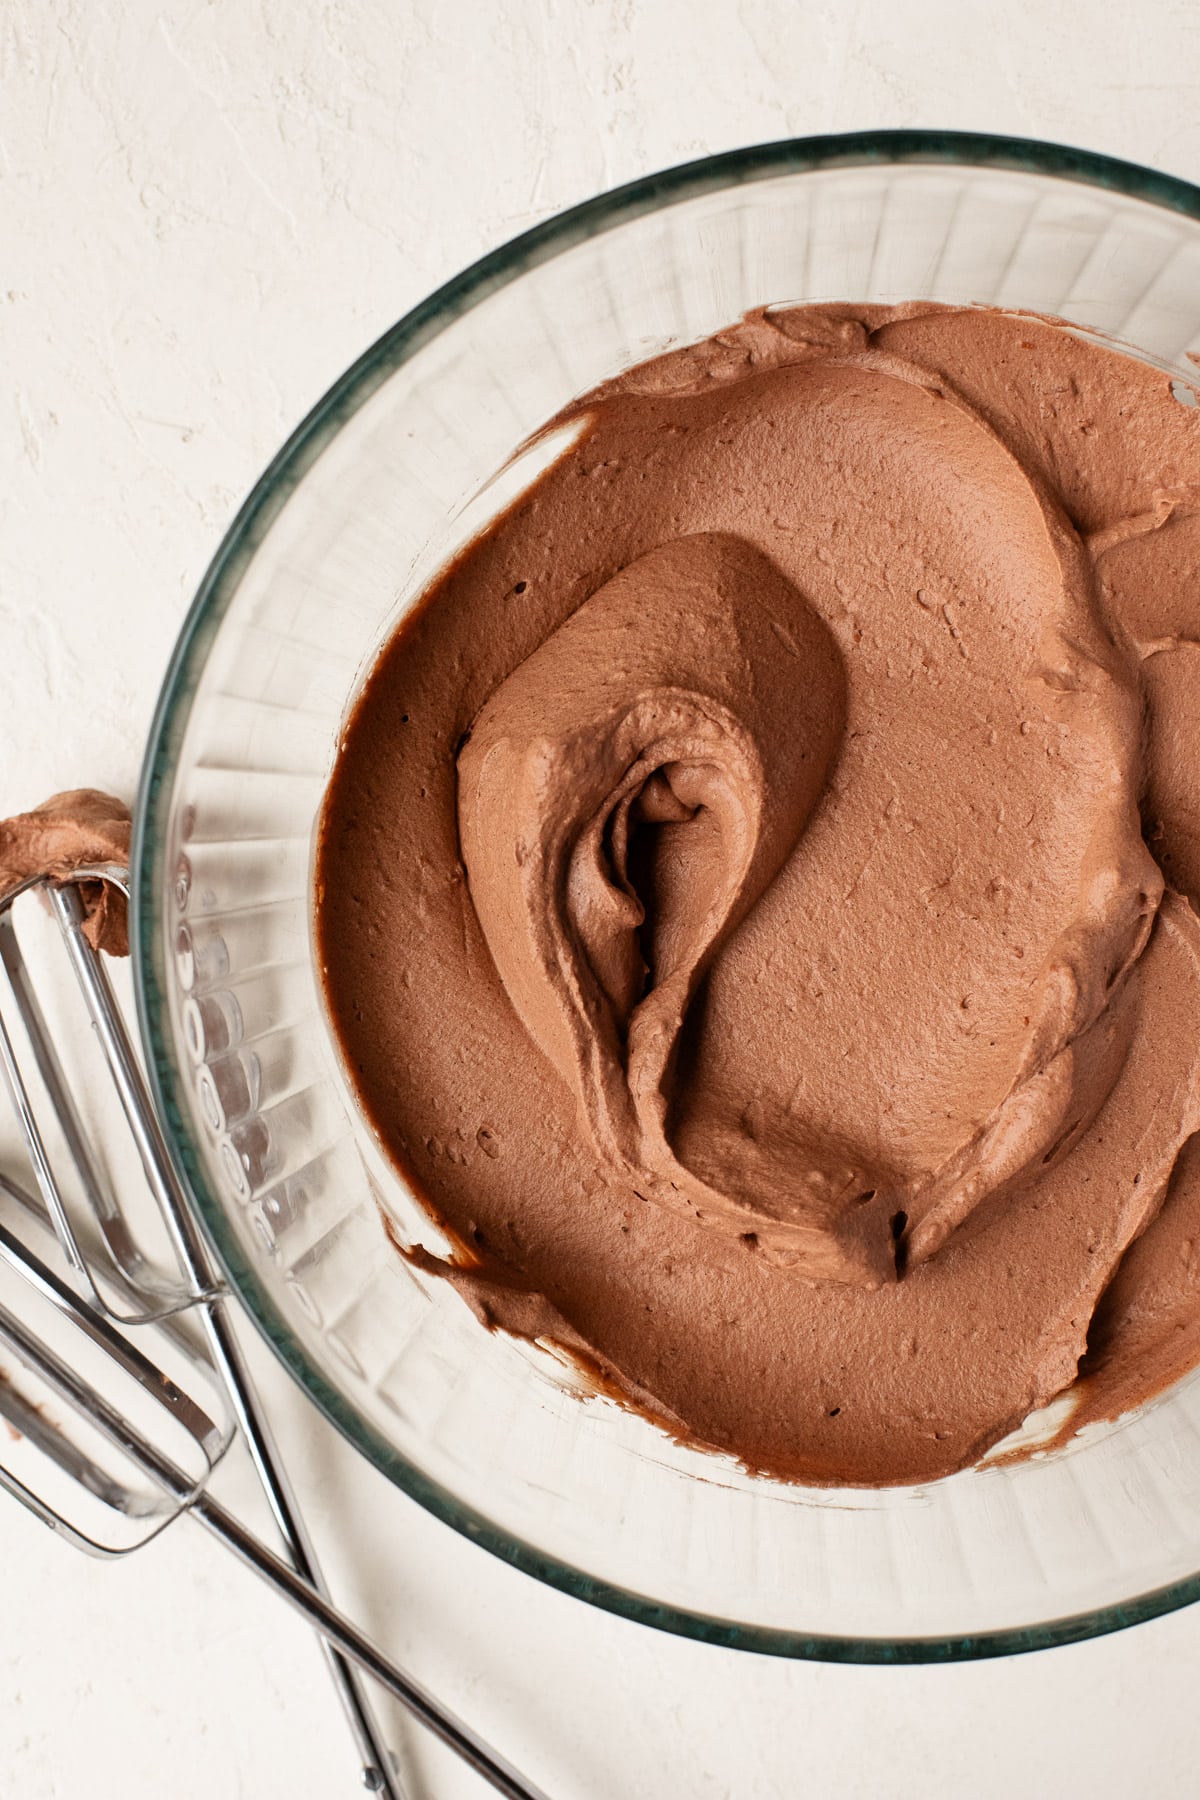 Chocolate cream whipped to stiff peaks in a large glass bowl.